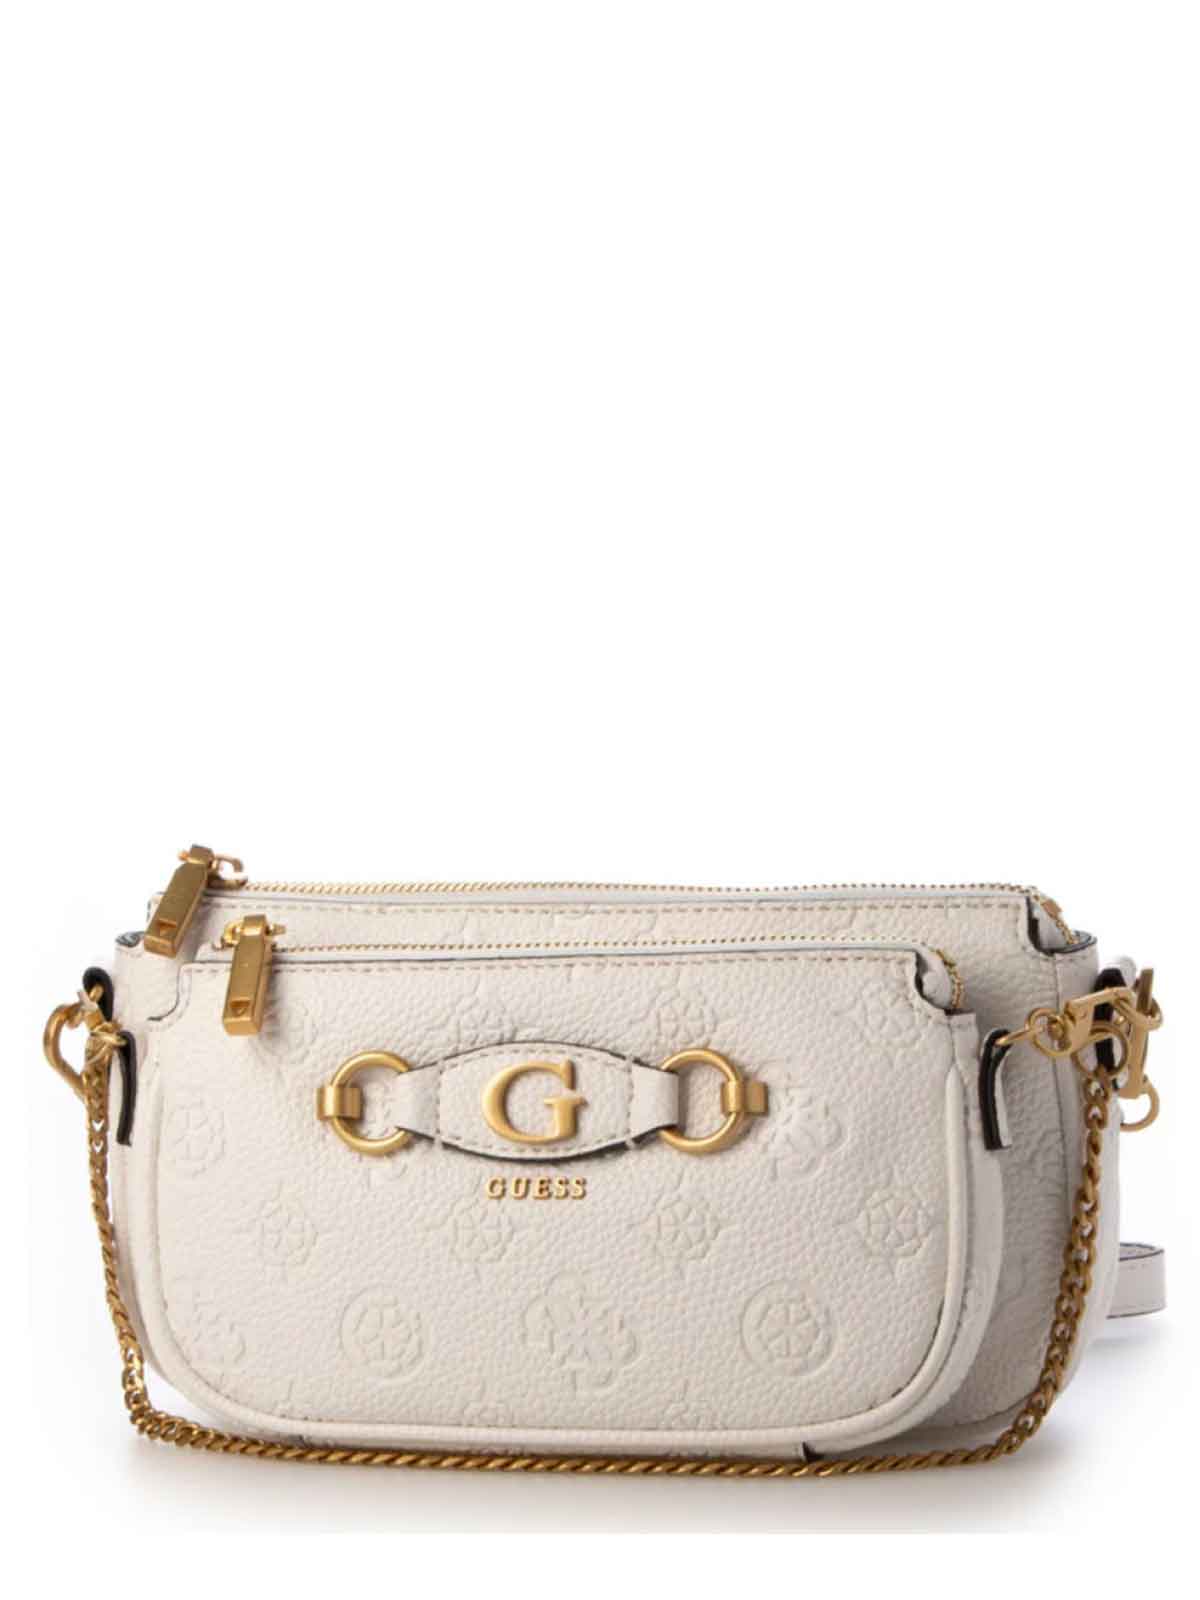   Guess | Izzy Peony Pouch Xbody Bag |  